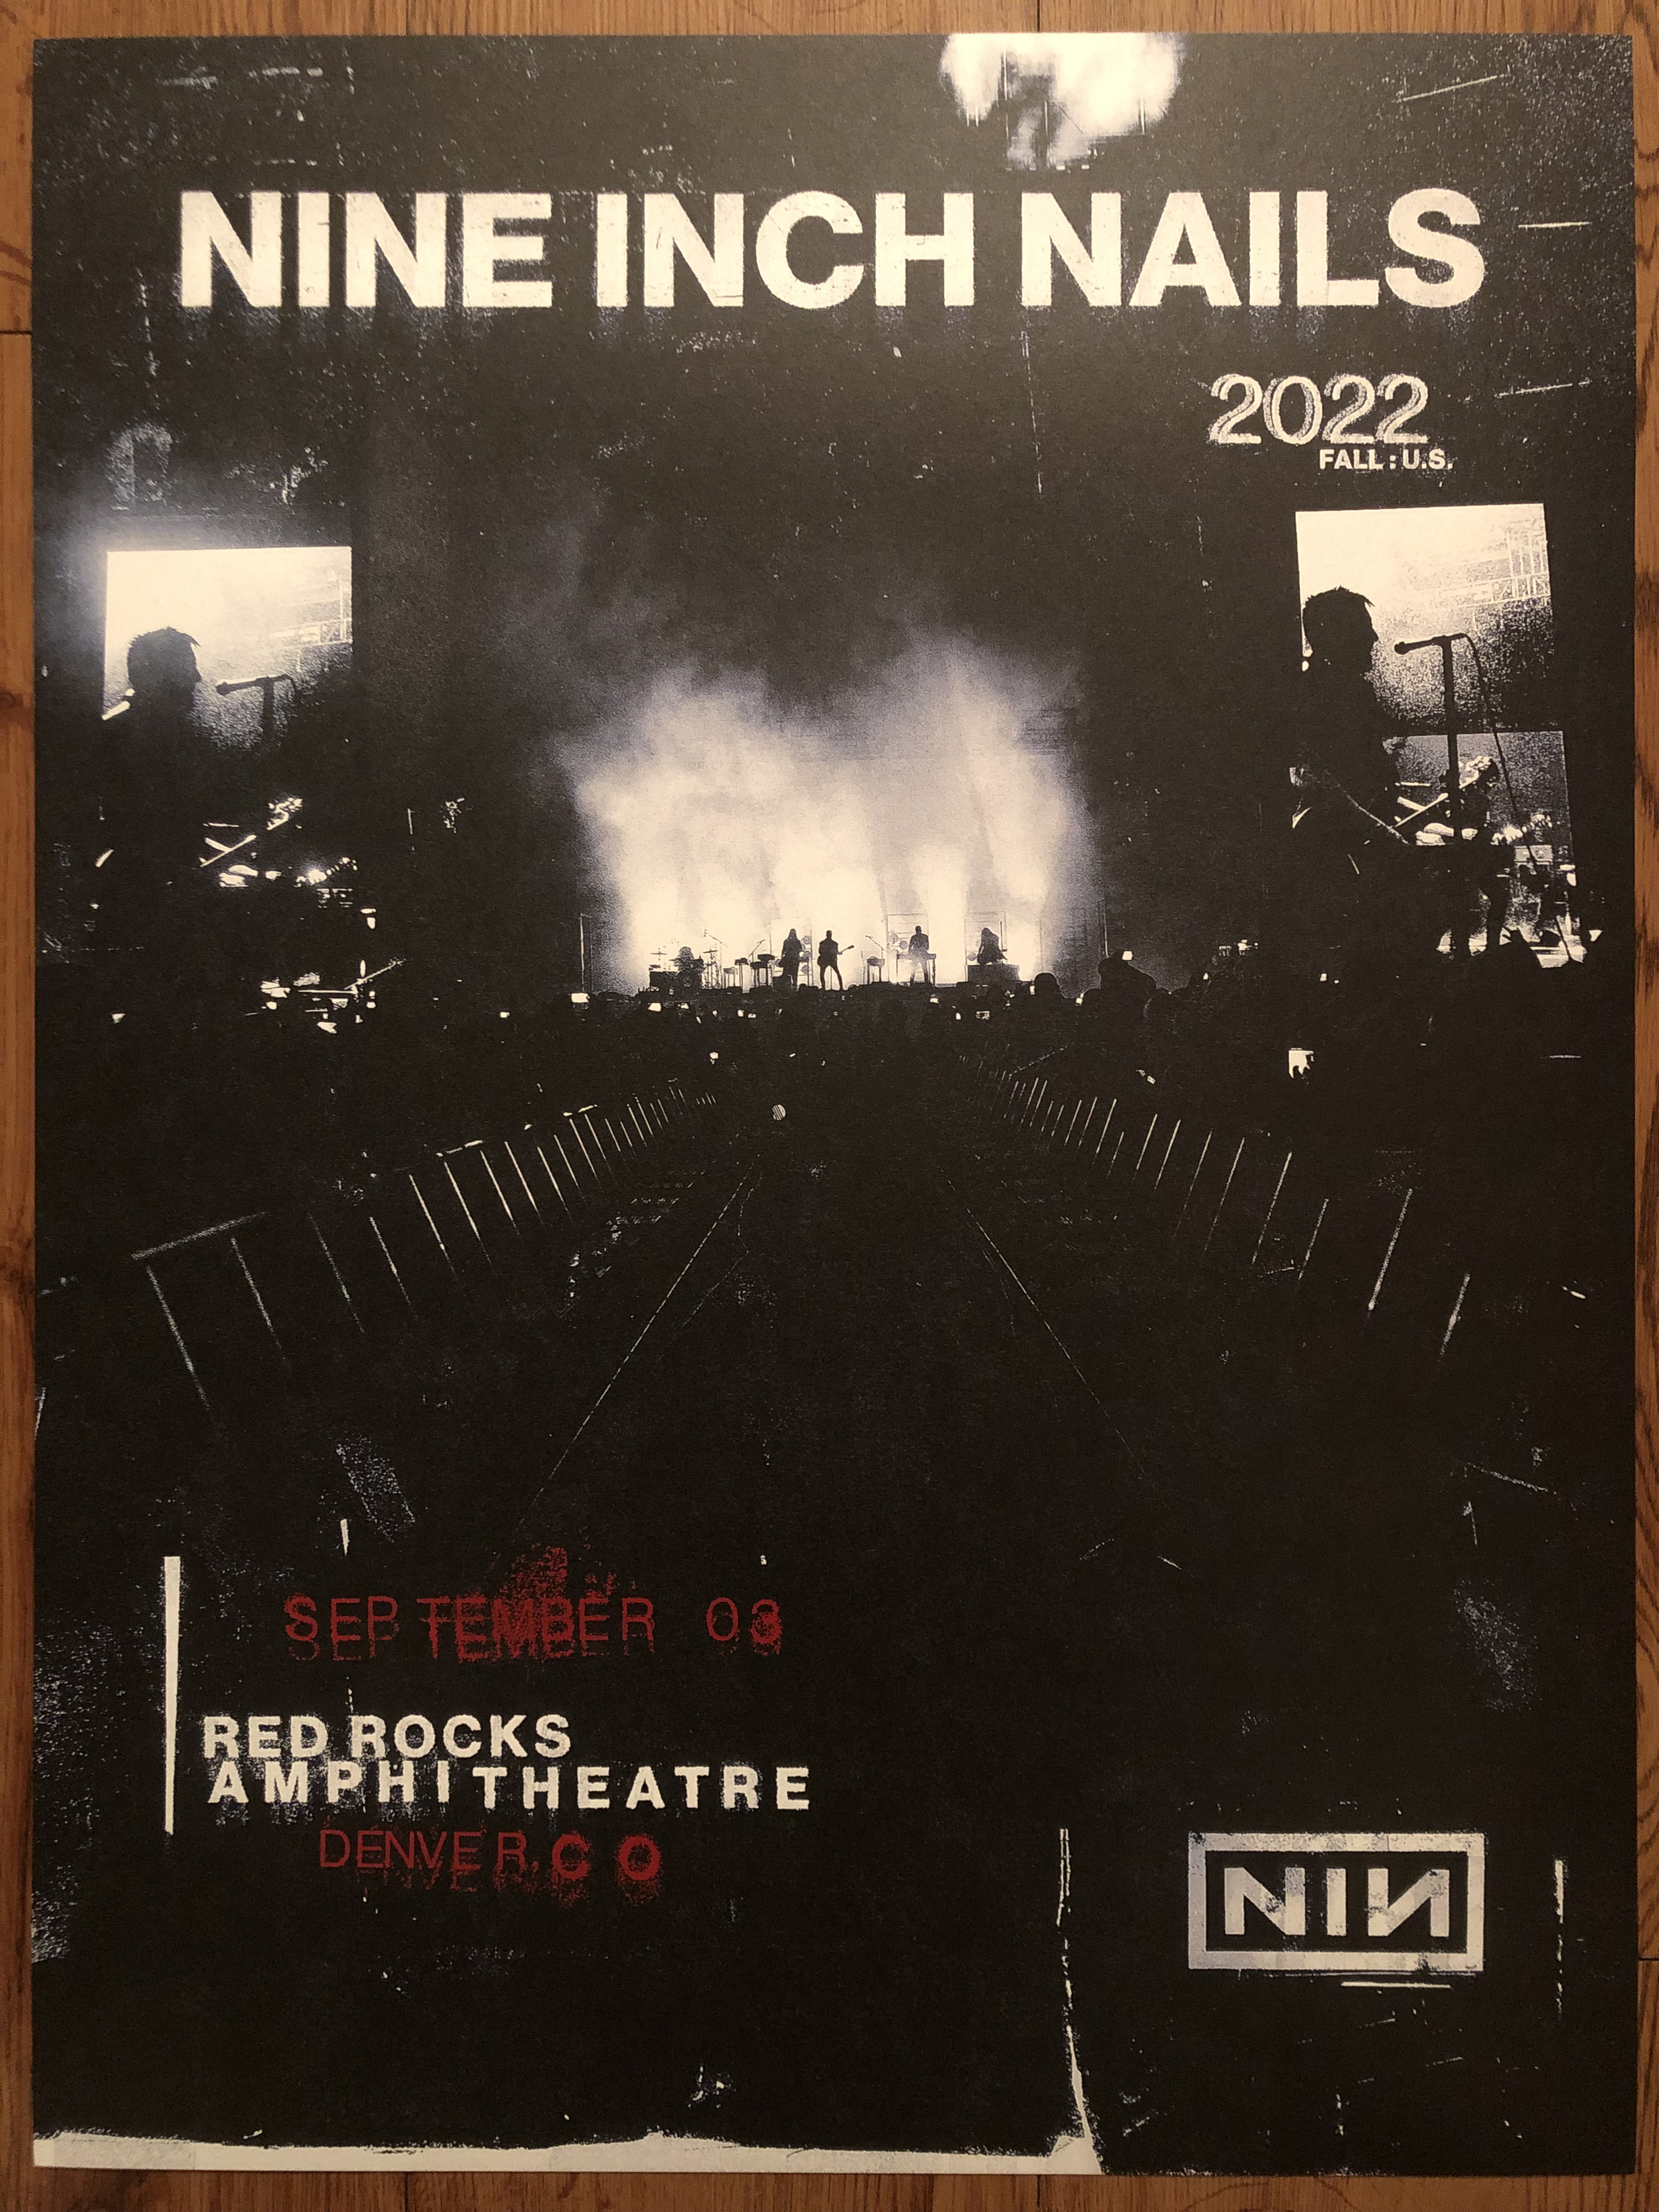 <a href='https://www.ebay.com/sch/i.html?_from=R40&_trksid=p2323012.m570.l1313&_nkw=Nine+Inch+Nails+Poster+Morrison&_sacat=0&mkcid=1&mkrid=711-53200-19255-0&siteid=0&campid=5336302525&customid=poster&toolid=10001&mkevt=1'>Buy this Poster!</a>